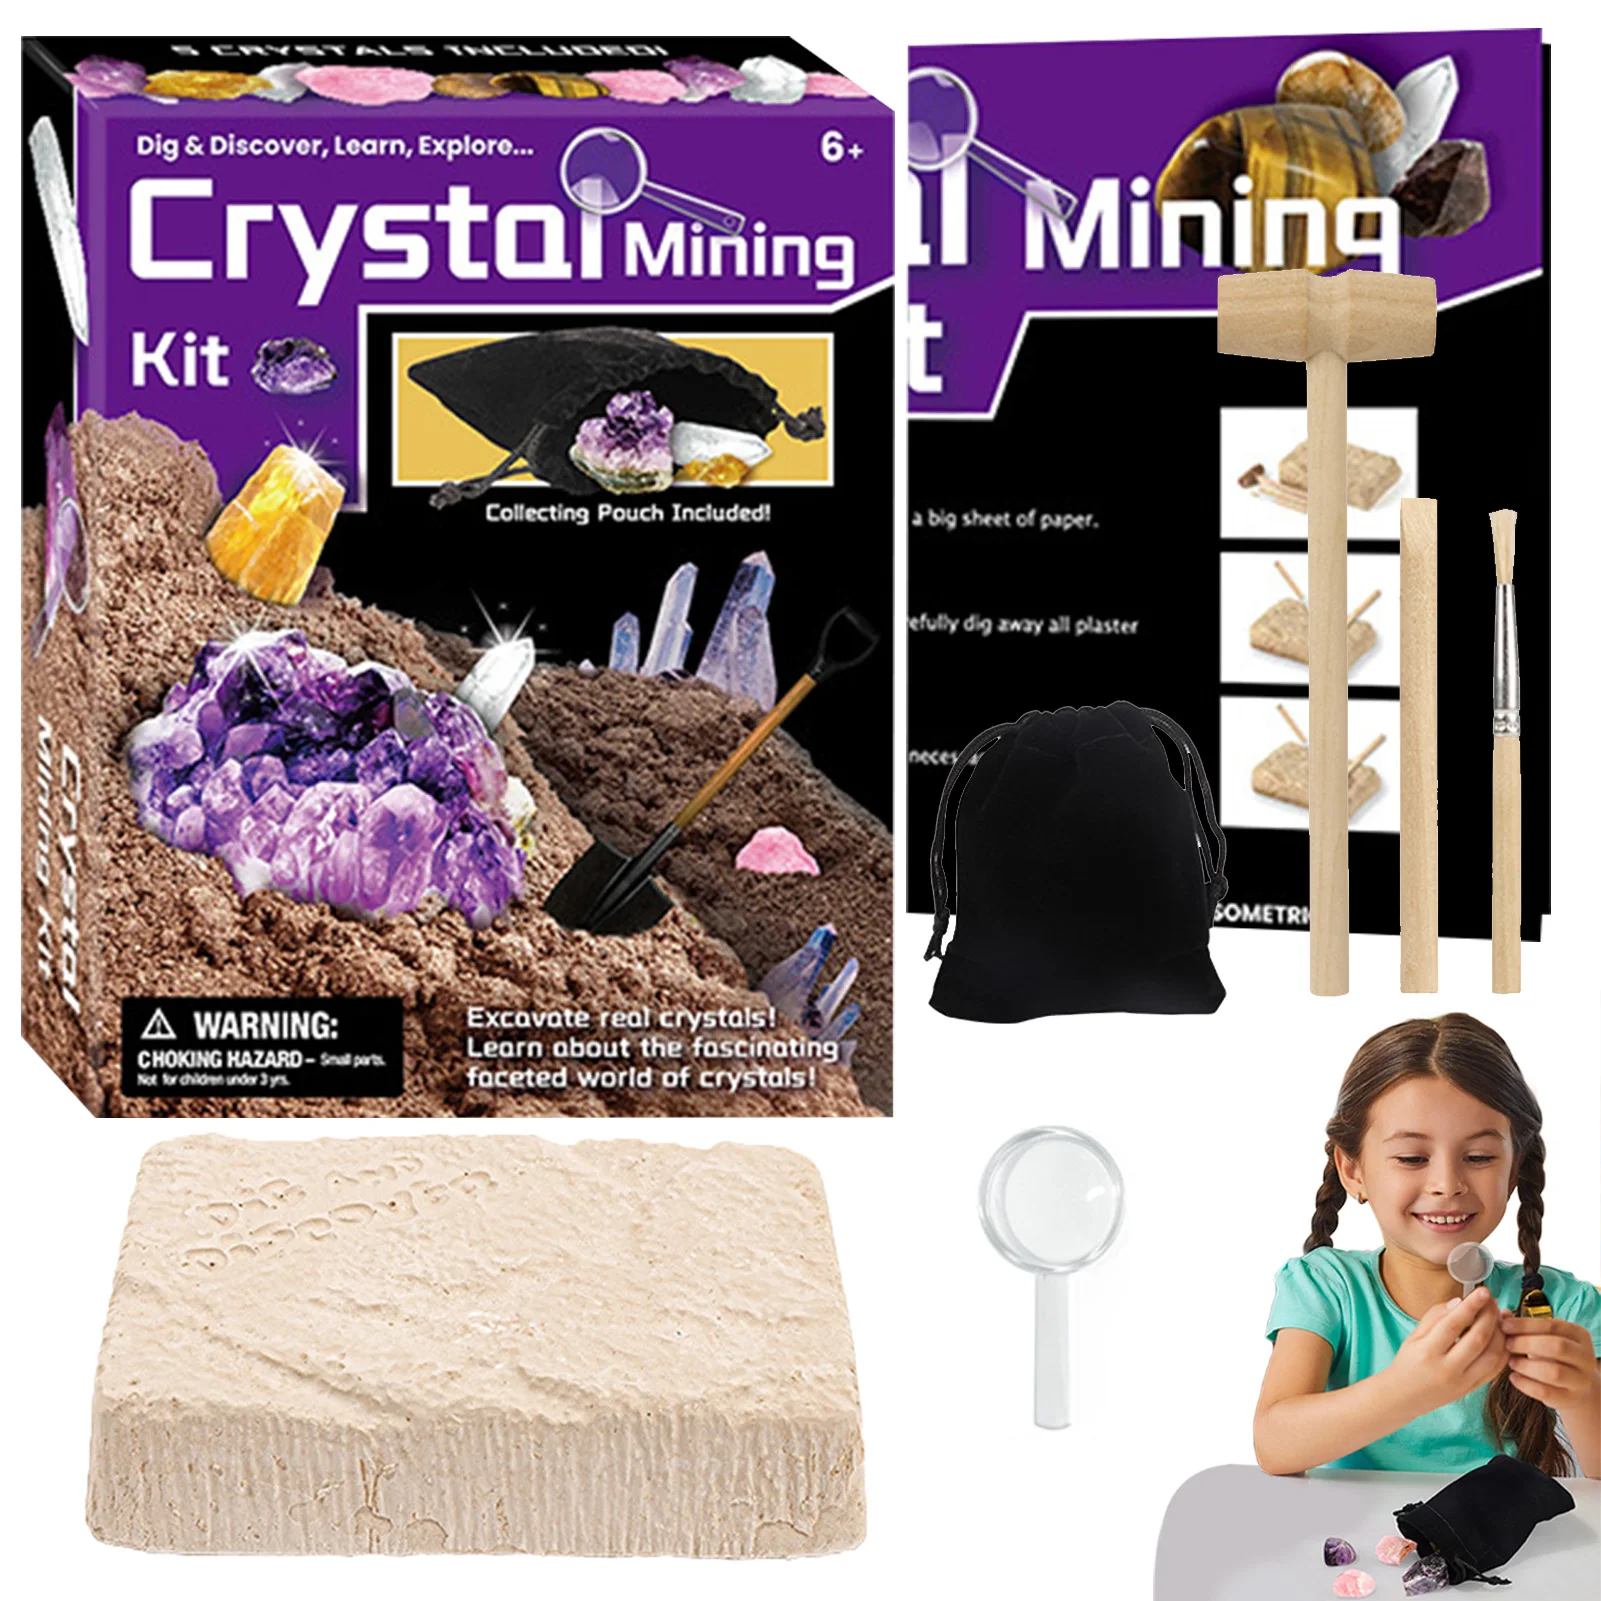 

Crystal Mining Kit Innovative Crystal Excavation Educational Science Kit | STEM Toys For Age 6 Up Kids Great Mineralogy Geology